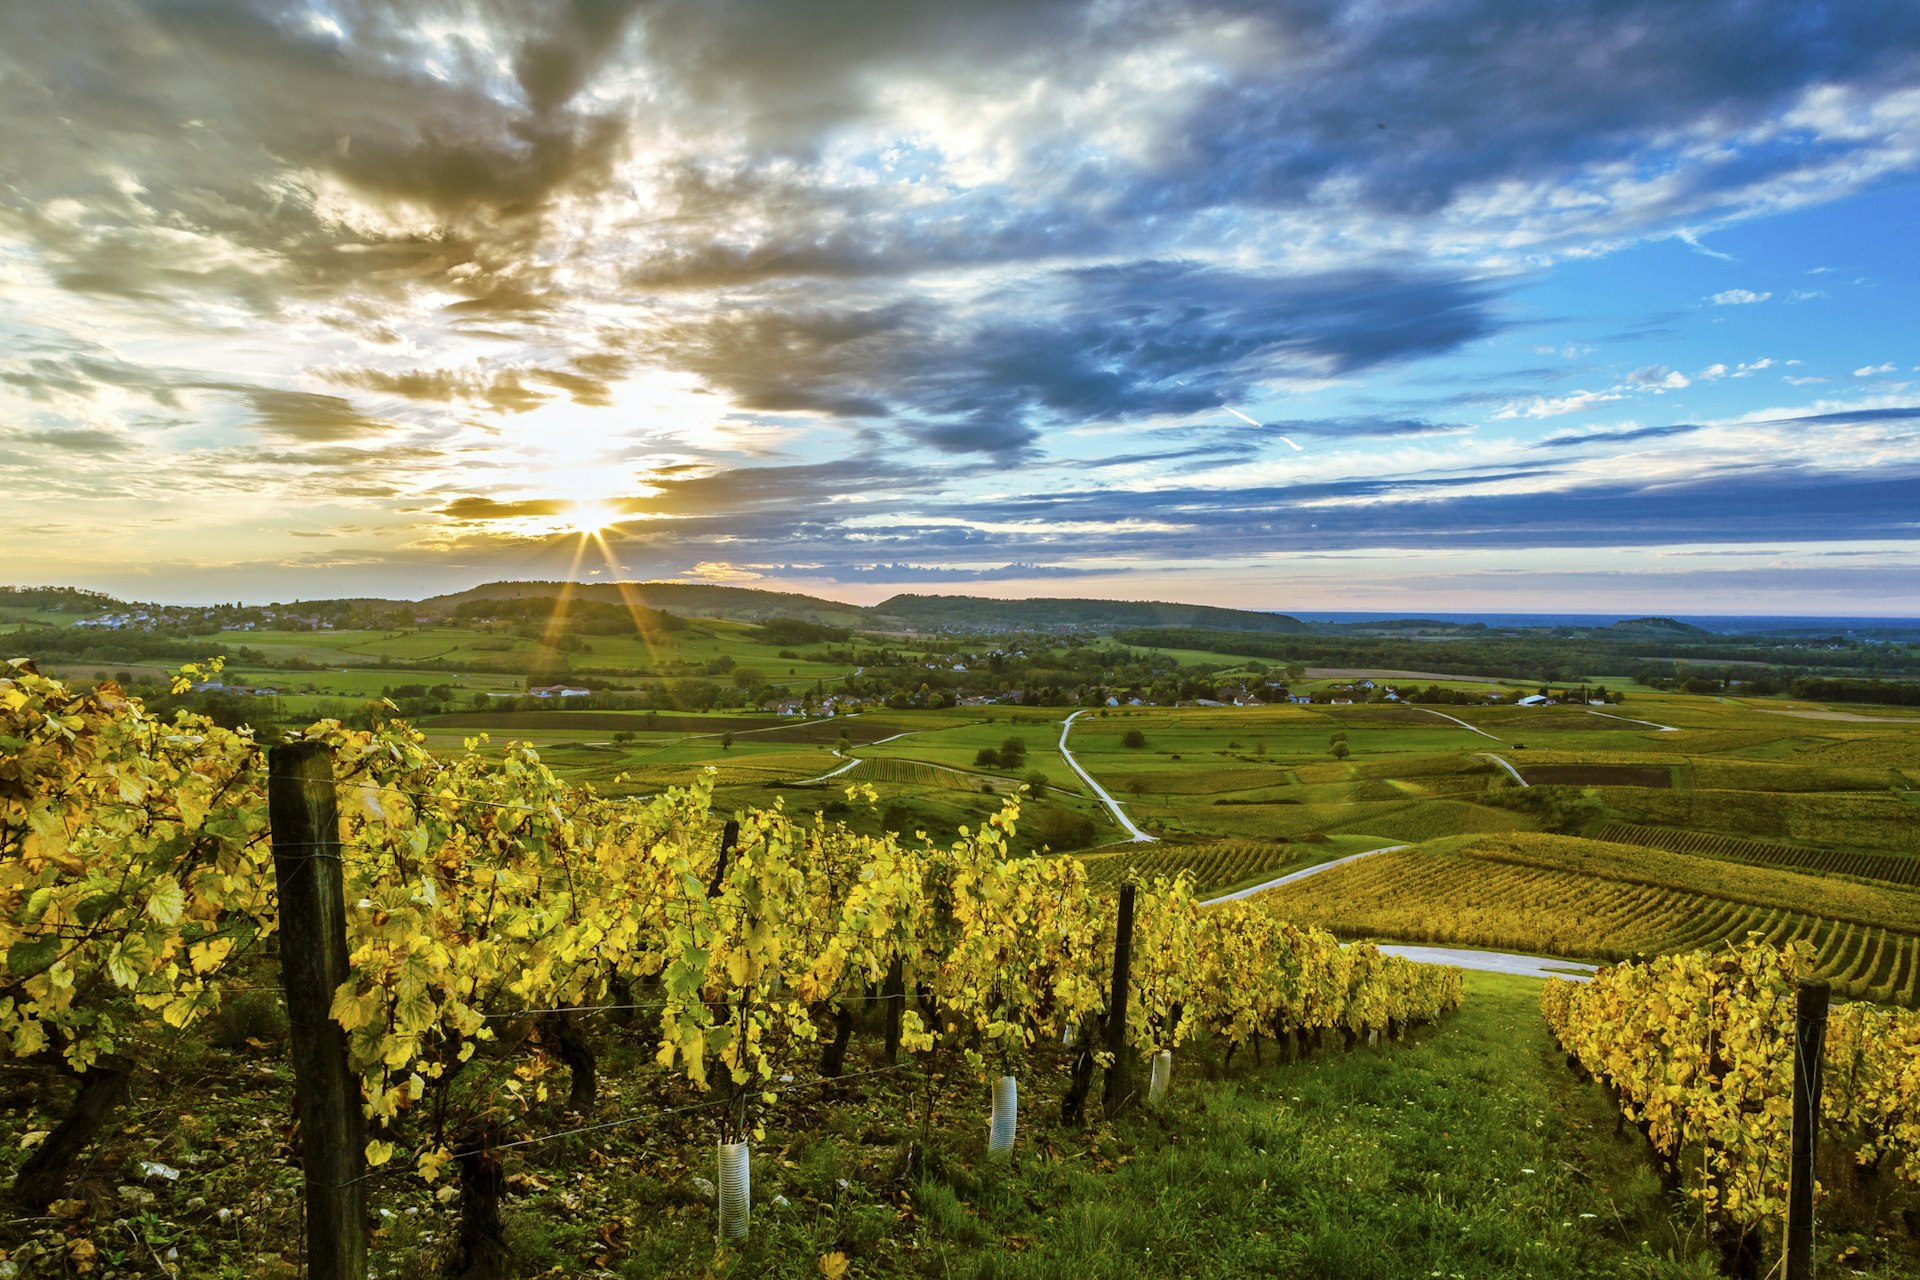 A beautiful sunset over hills covered in vineyards in the Jura